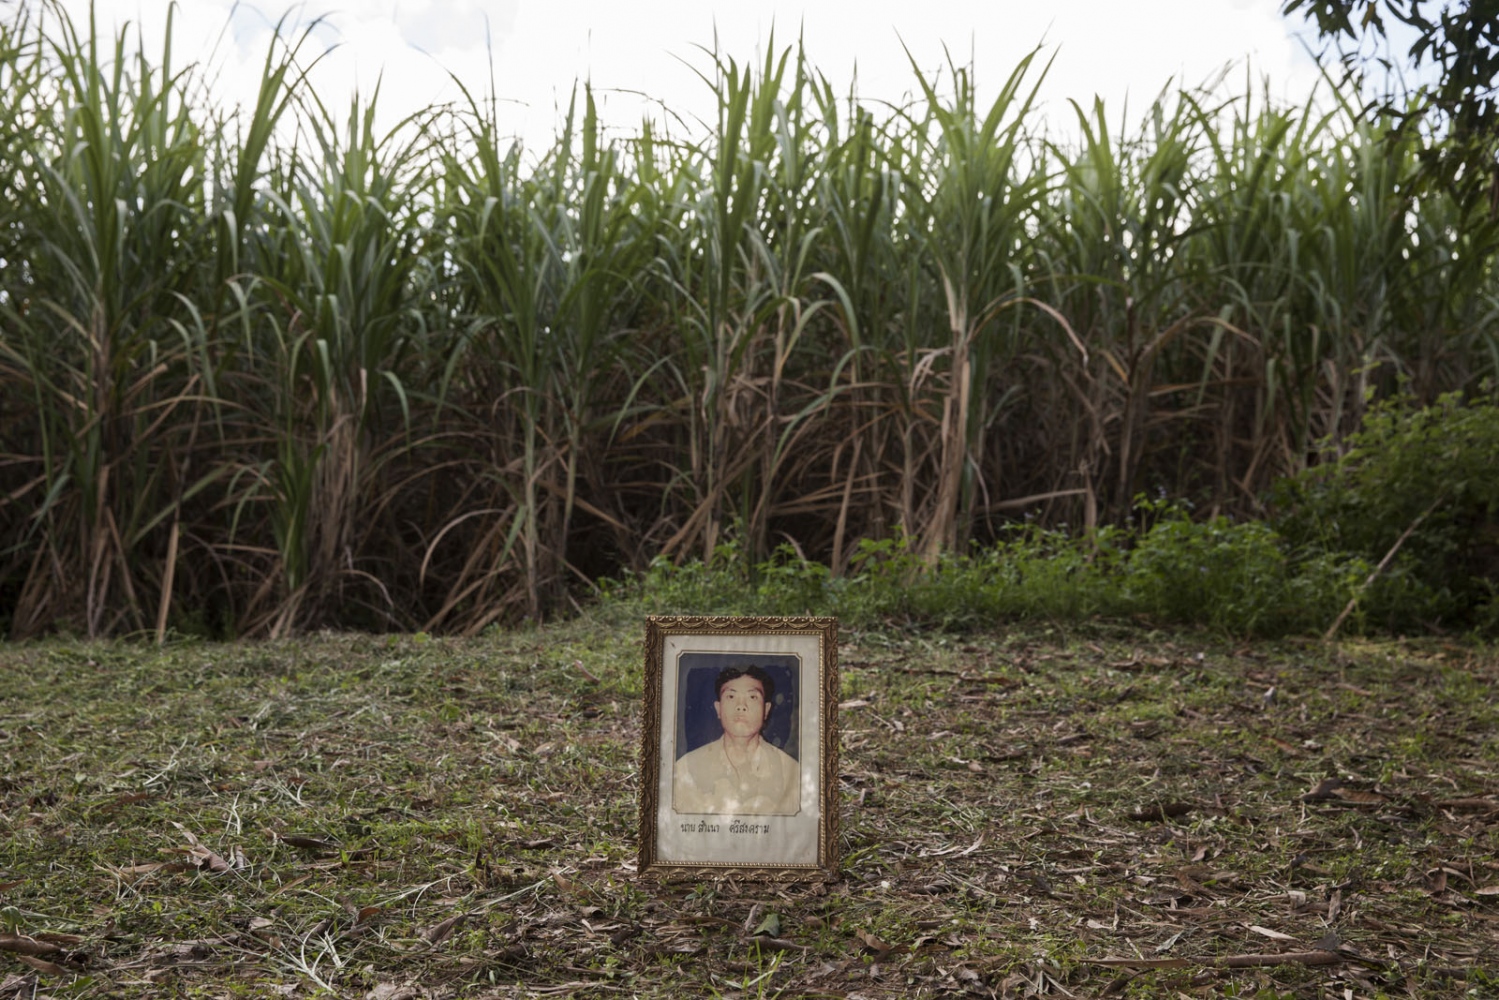 FOR THOSE WHO DIED TRYING -  SSamnao Srisongkhram, 38, was shot dead in a field near...